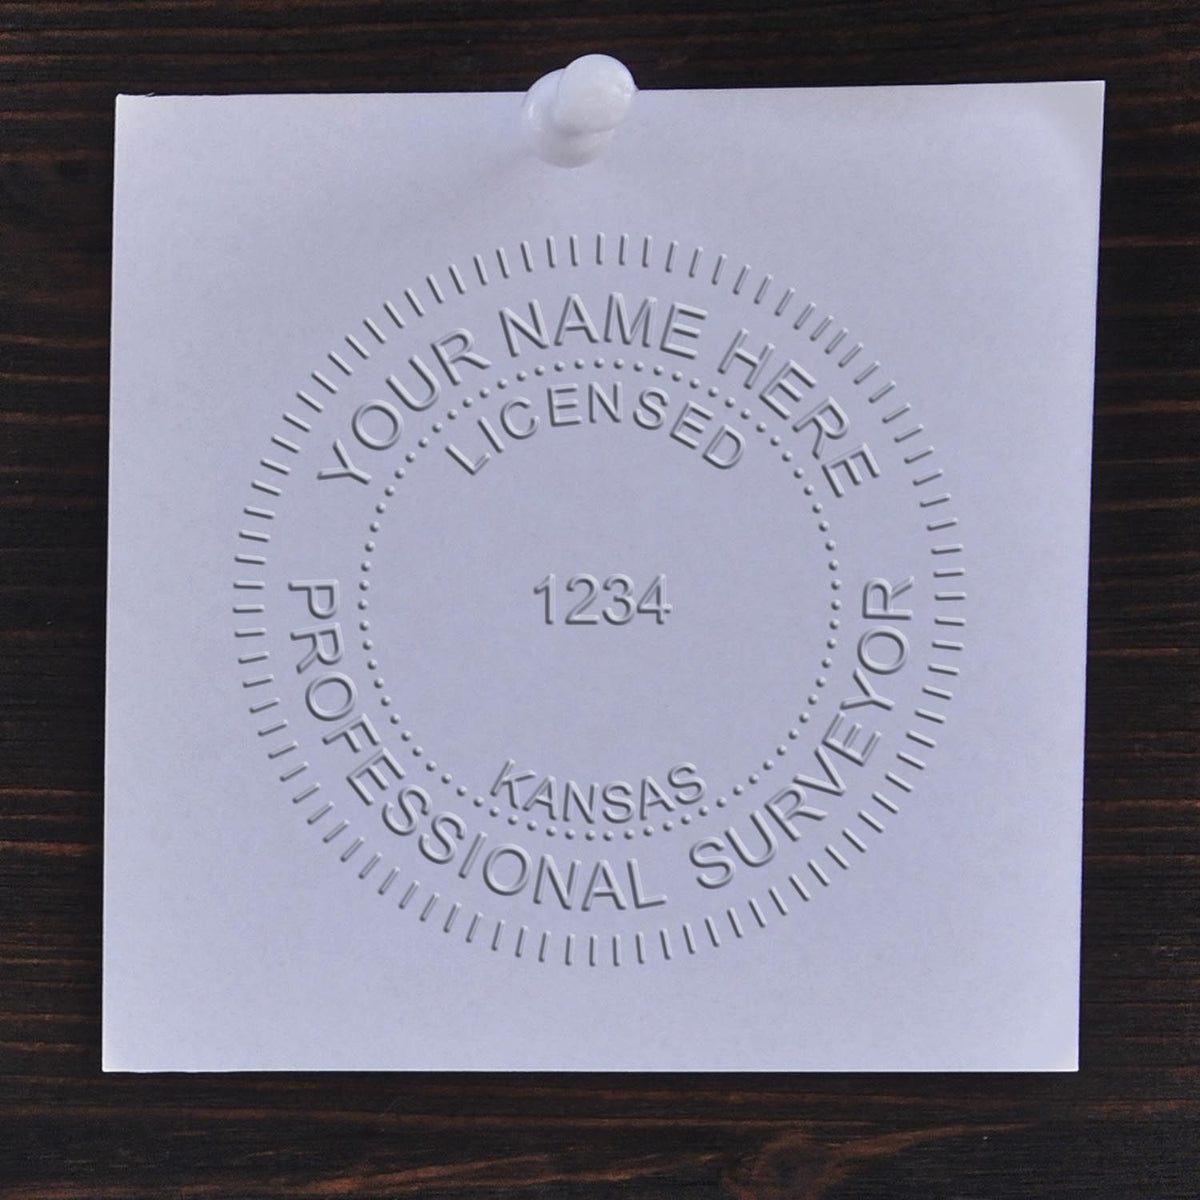 A stamped impression of the Long Reach Kansas Land Surveyor Seal in this stylish lifestyle photo, setting the tone for a unique and personalized product.